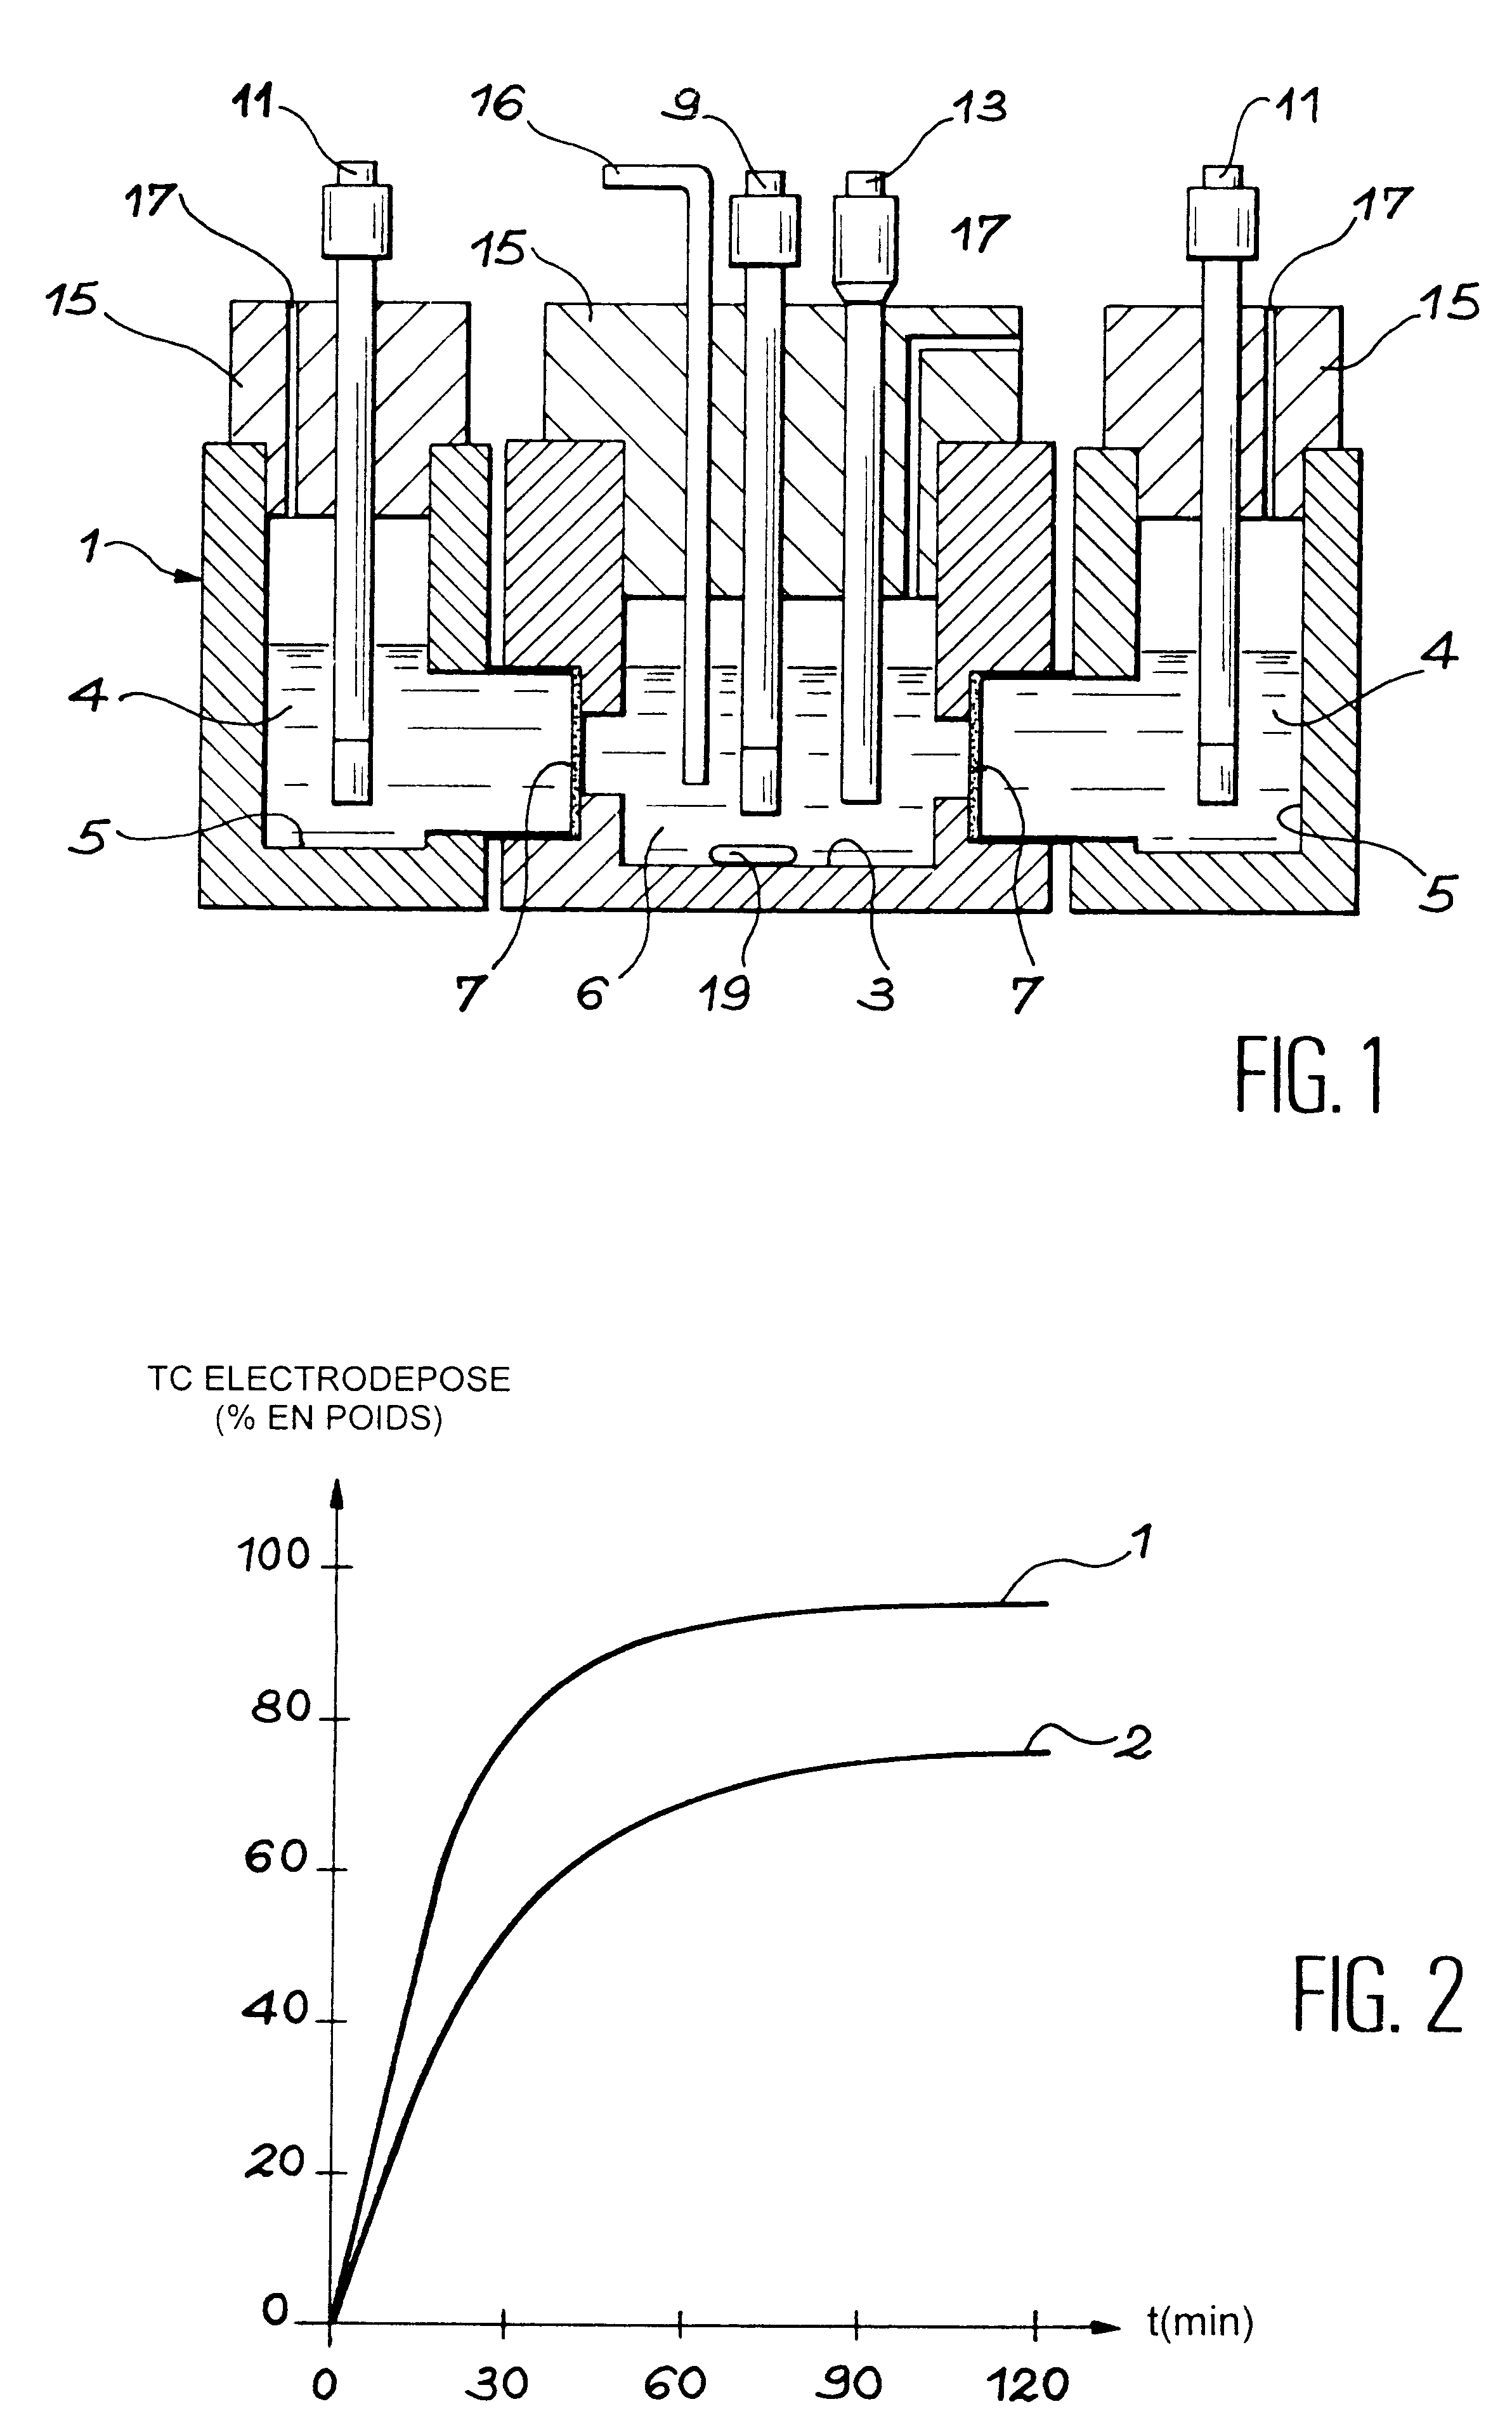 Method for separating technetium from a nitric solution